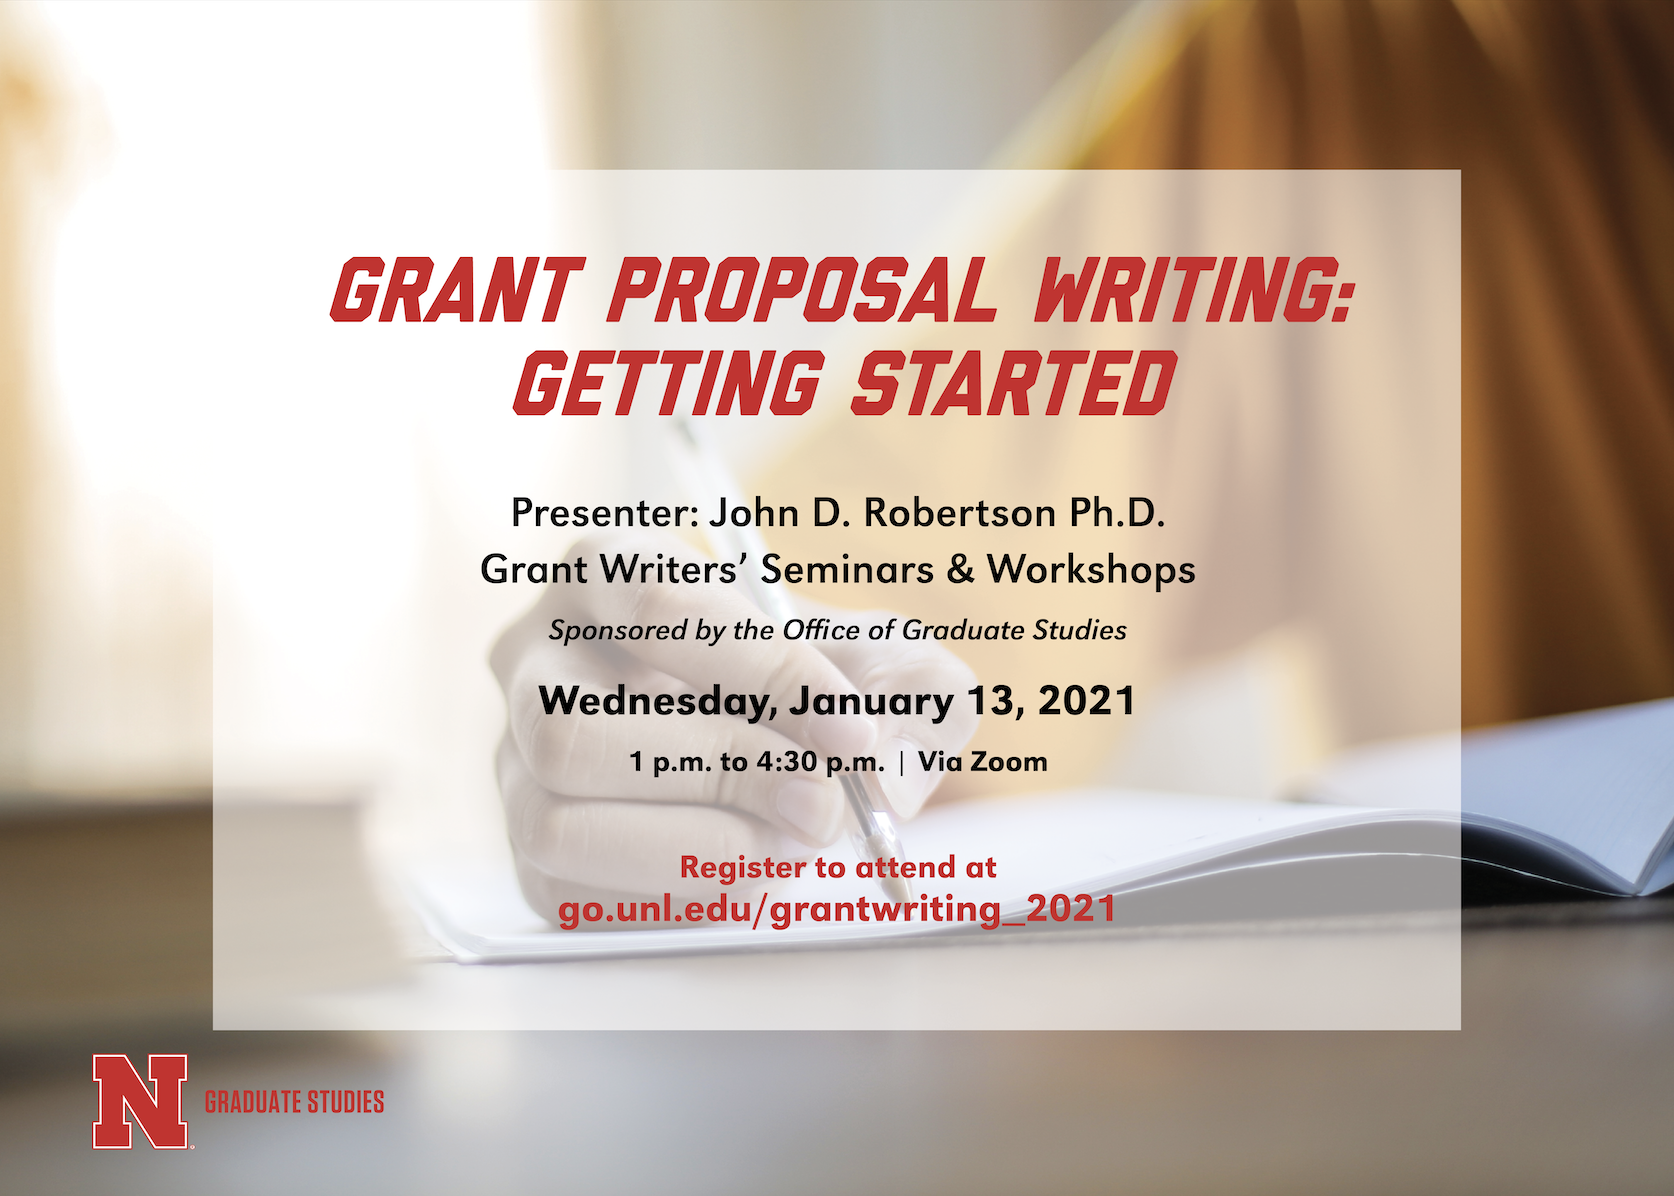 The virtual seminar will comprehensively address both practical and conceptual aspects important to the proposal writing process.